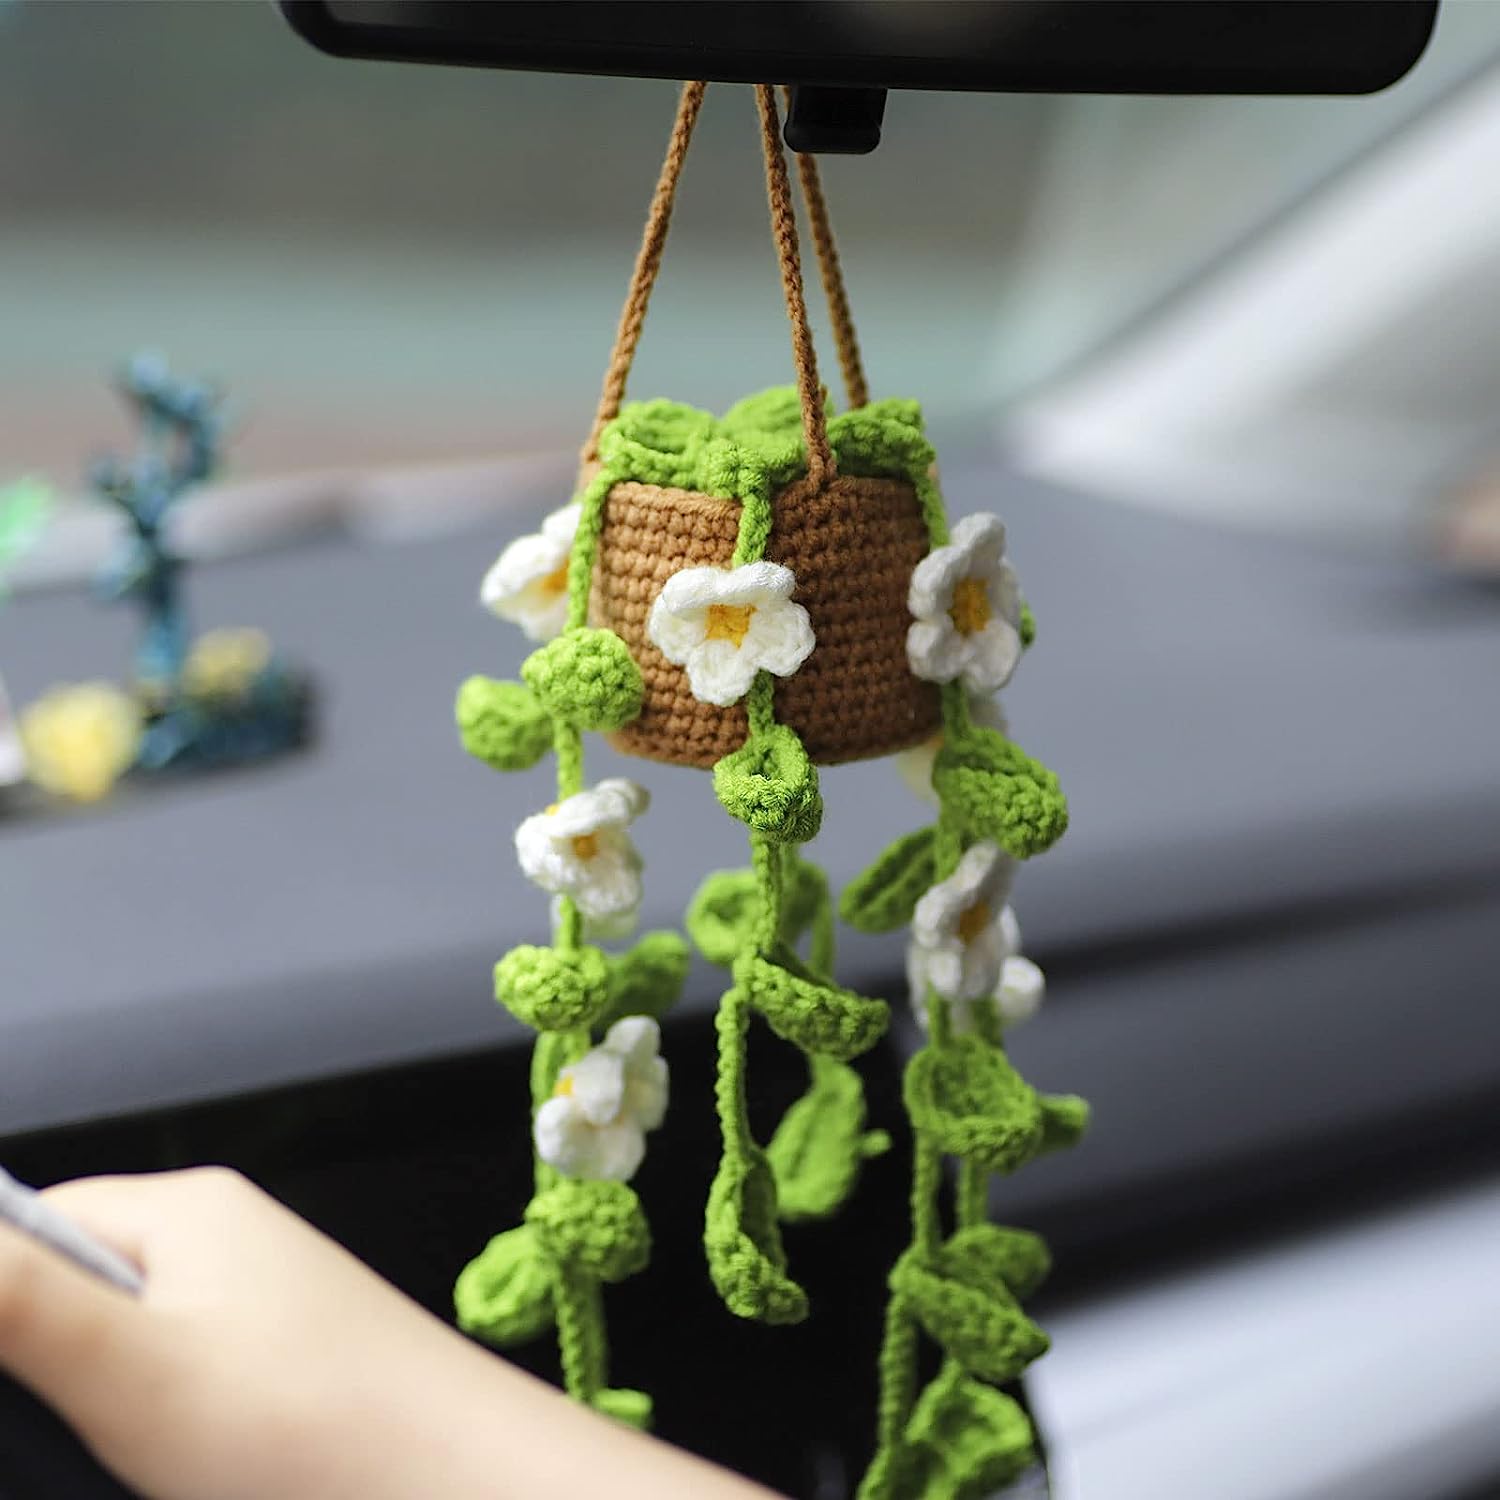 SYCAMORE EAST Cute Potted Plants Crochet Car Mirror Hanging Accessories  Cute Car Accessories For Women Men Handmade Knitted Rear View Mirror